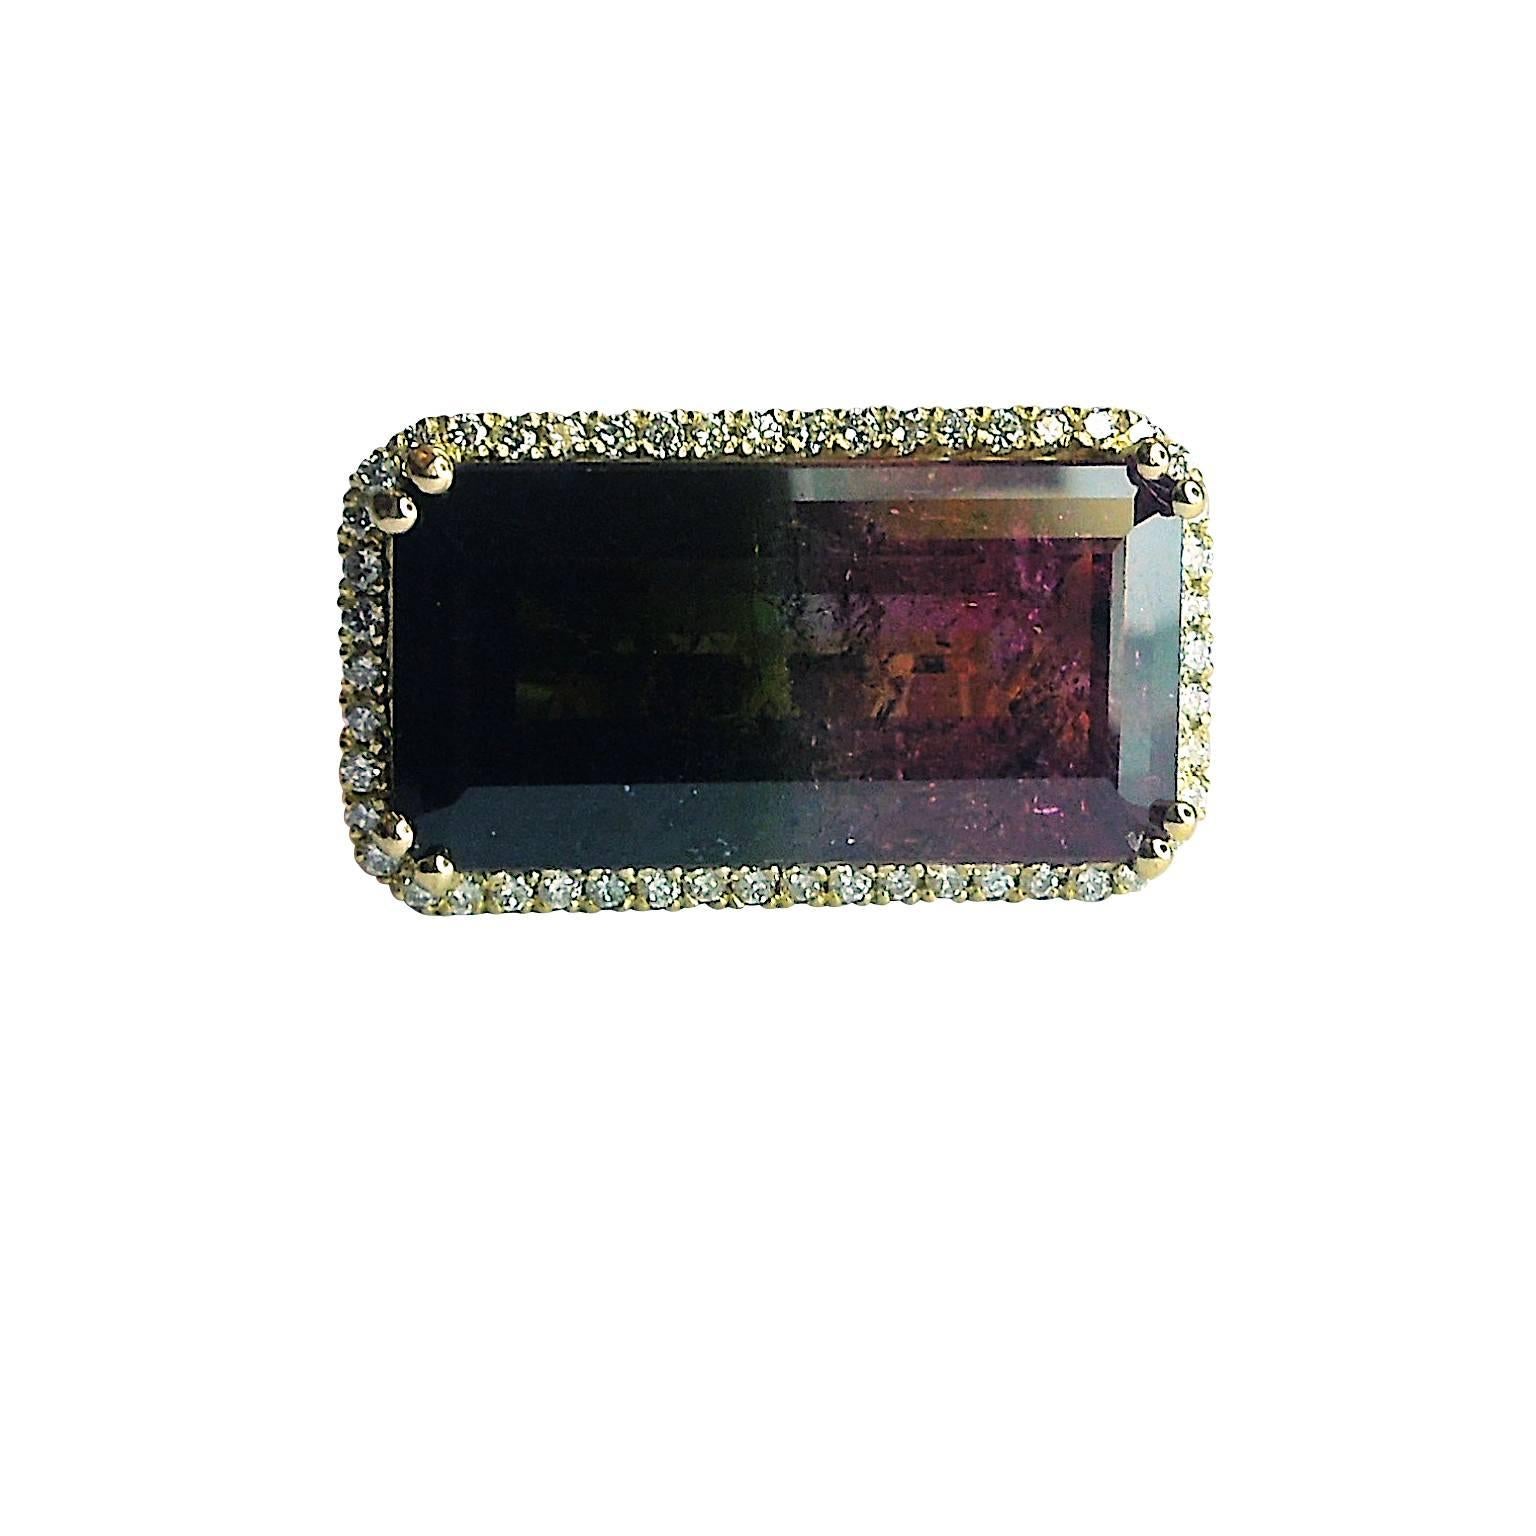 18K Gold and Diamond Ring with Watermelon Tourmaline Center

Beautiful Bi-Color Watermelon Tourmaline center, 20.54ct.

0.75ct. Diamonds total weight.

Hand made open work ring, face of the ring is 1 inch x 0.6 inch

Currently size 6.5. Can be sized